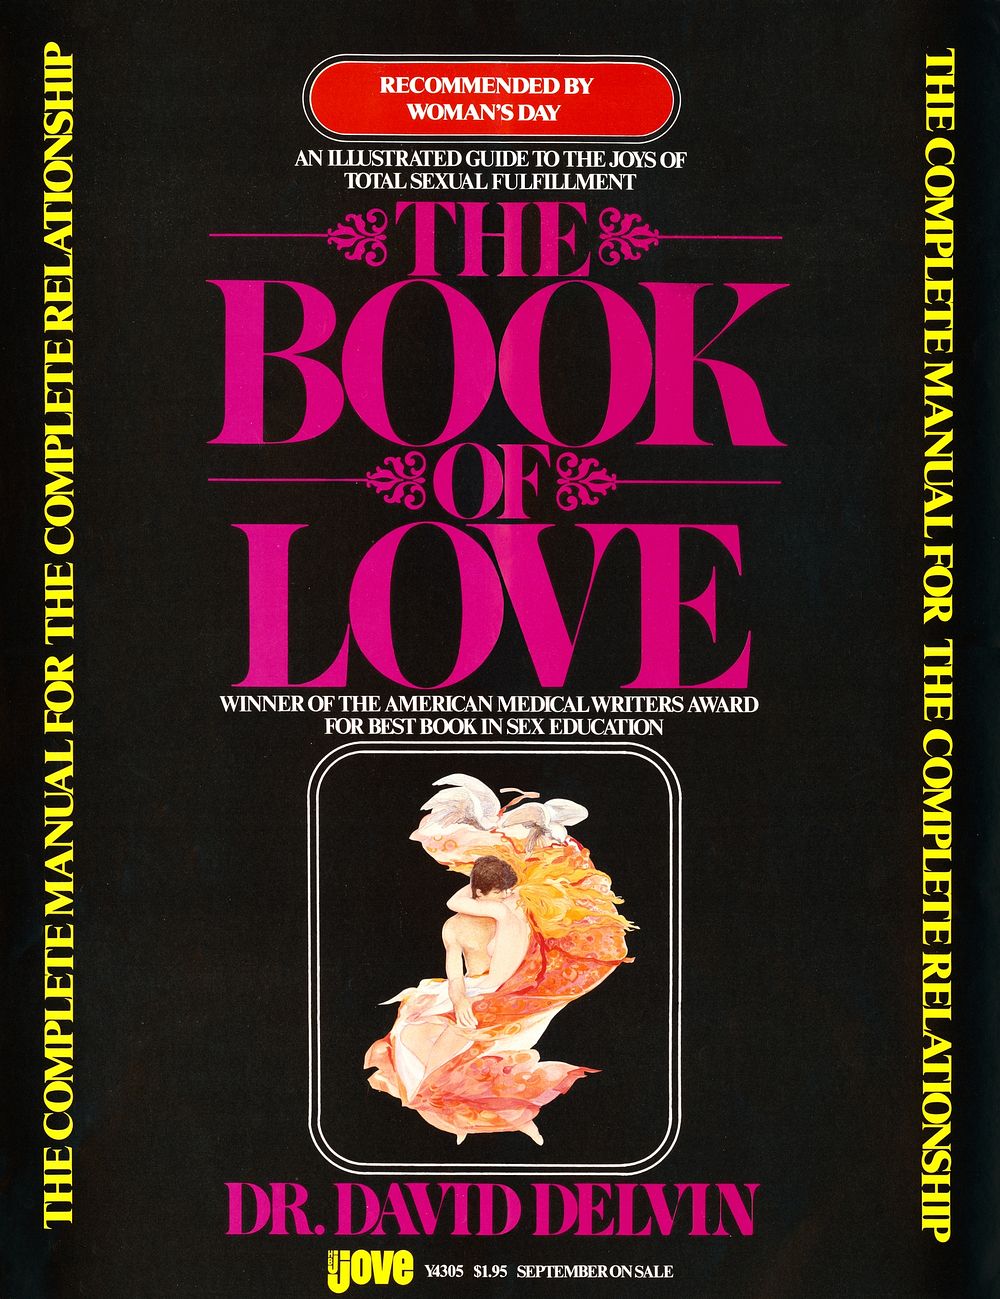 The book of love by Dr. David Delvin (1977) vintage poster by Jove/HBJ. Original public domain image from the Library of…